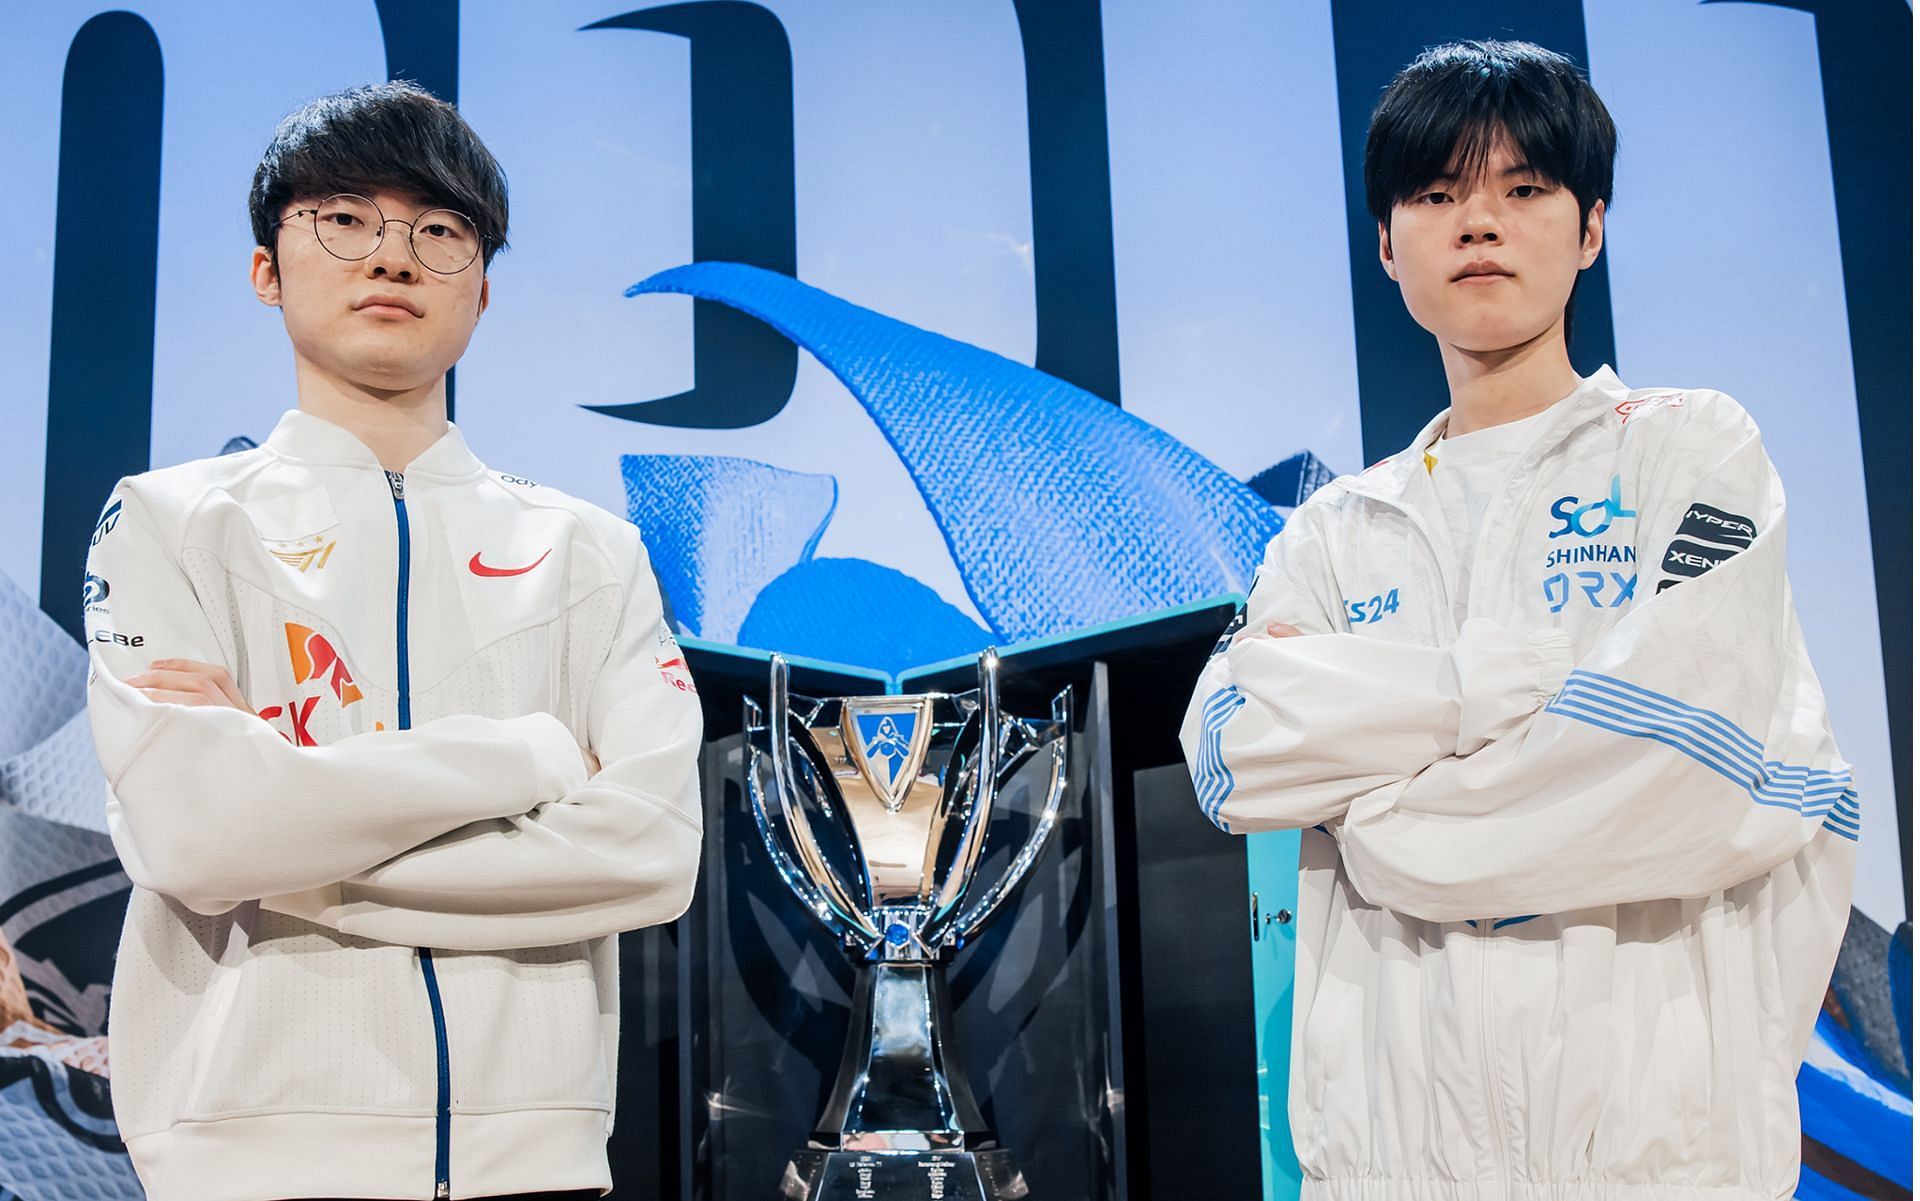 T1 vs DRX at Worlds 2022 Finals is more than just a game, it is a means to create a legacy (Image via Riot Games)